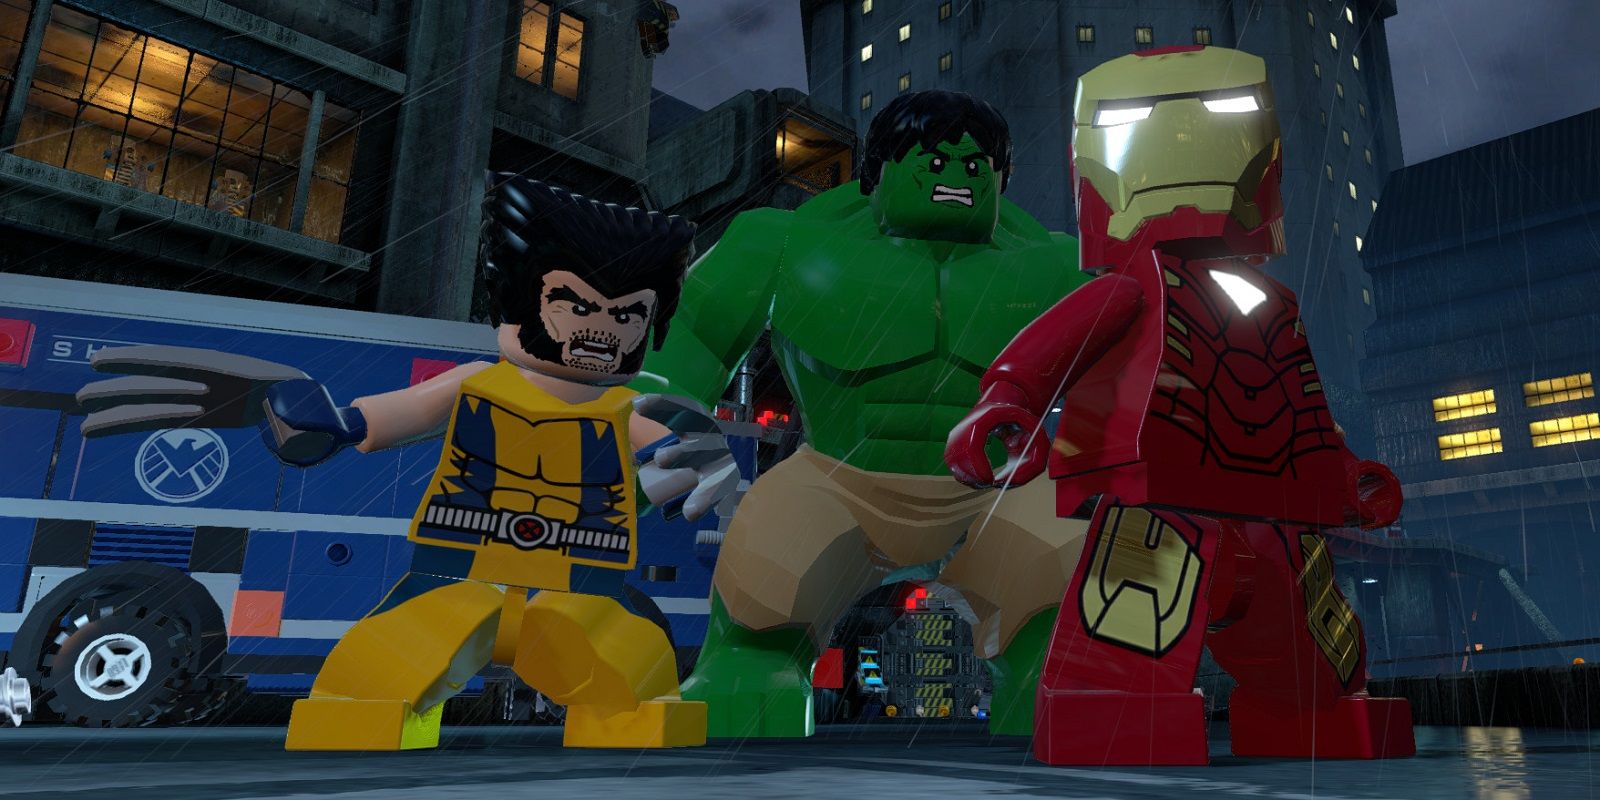 Lego versions of Hulk, Wolverine, and Iron-Man stand in the street ready for action